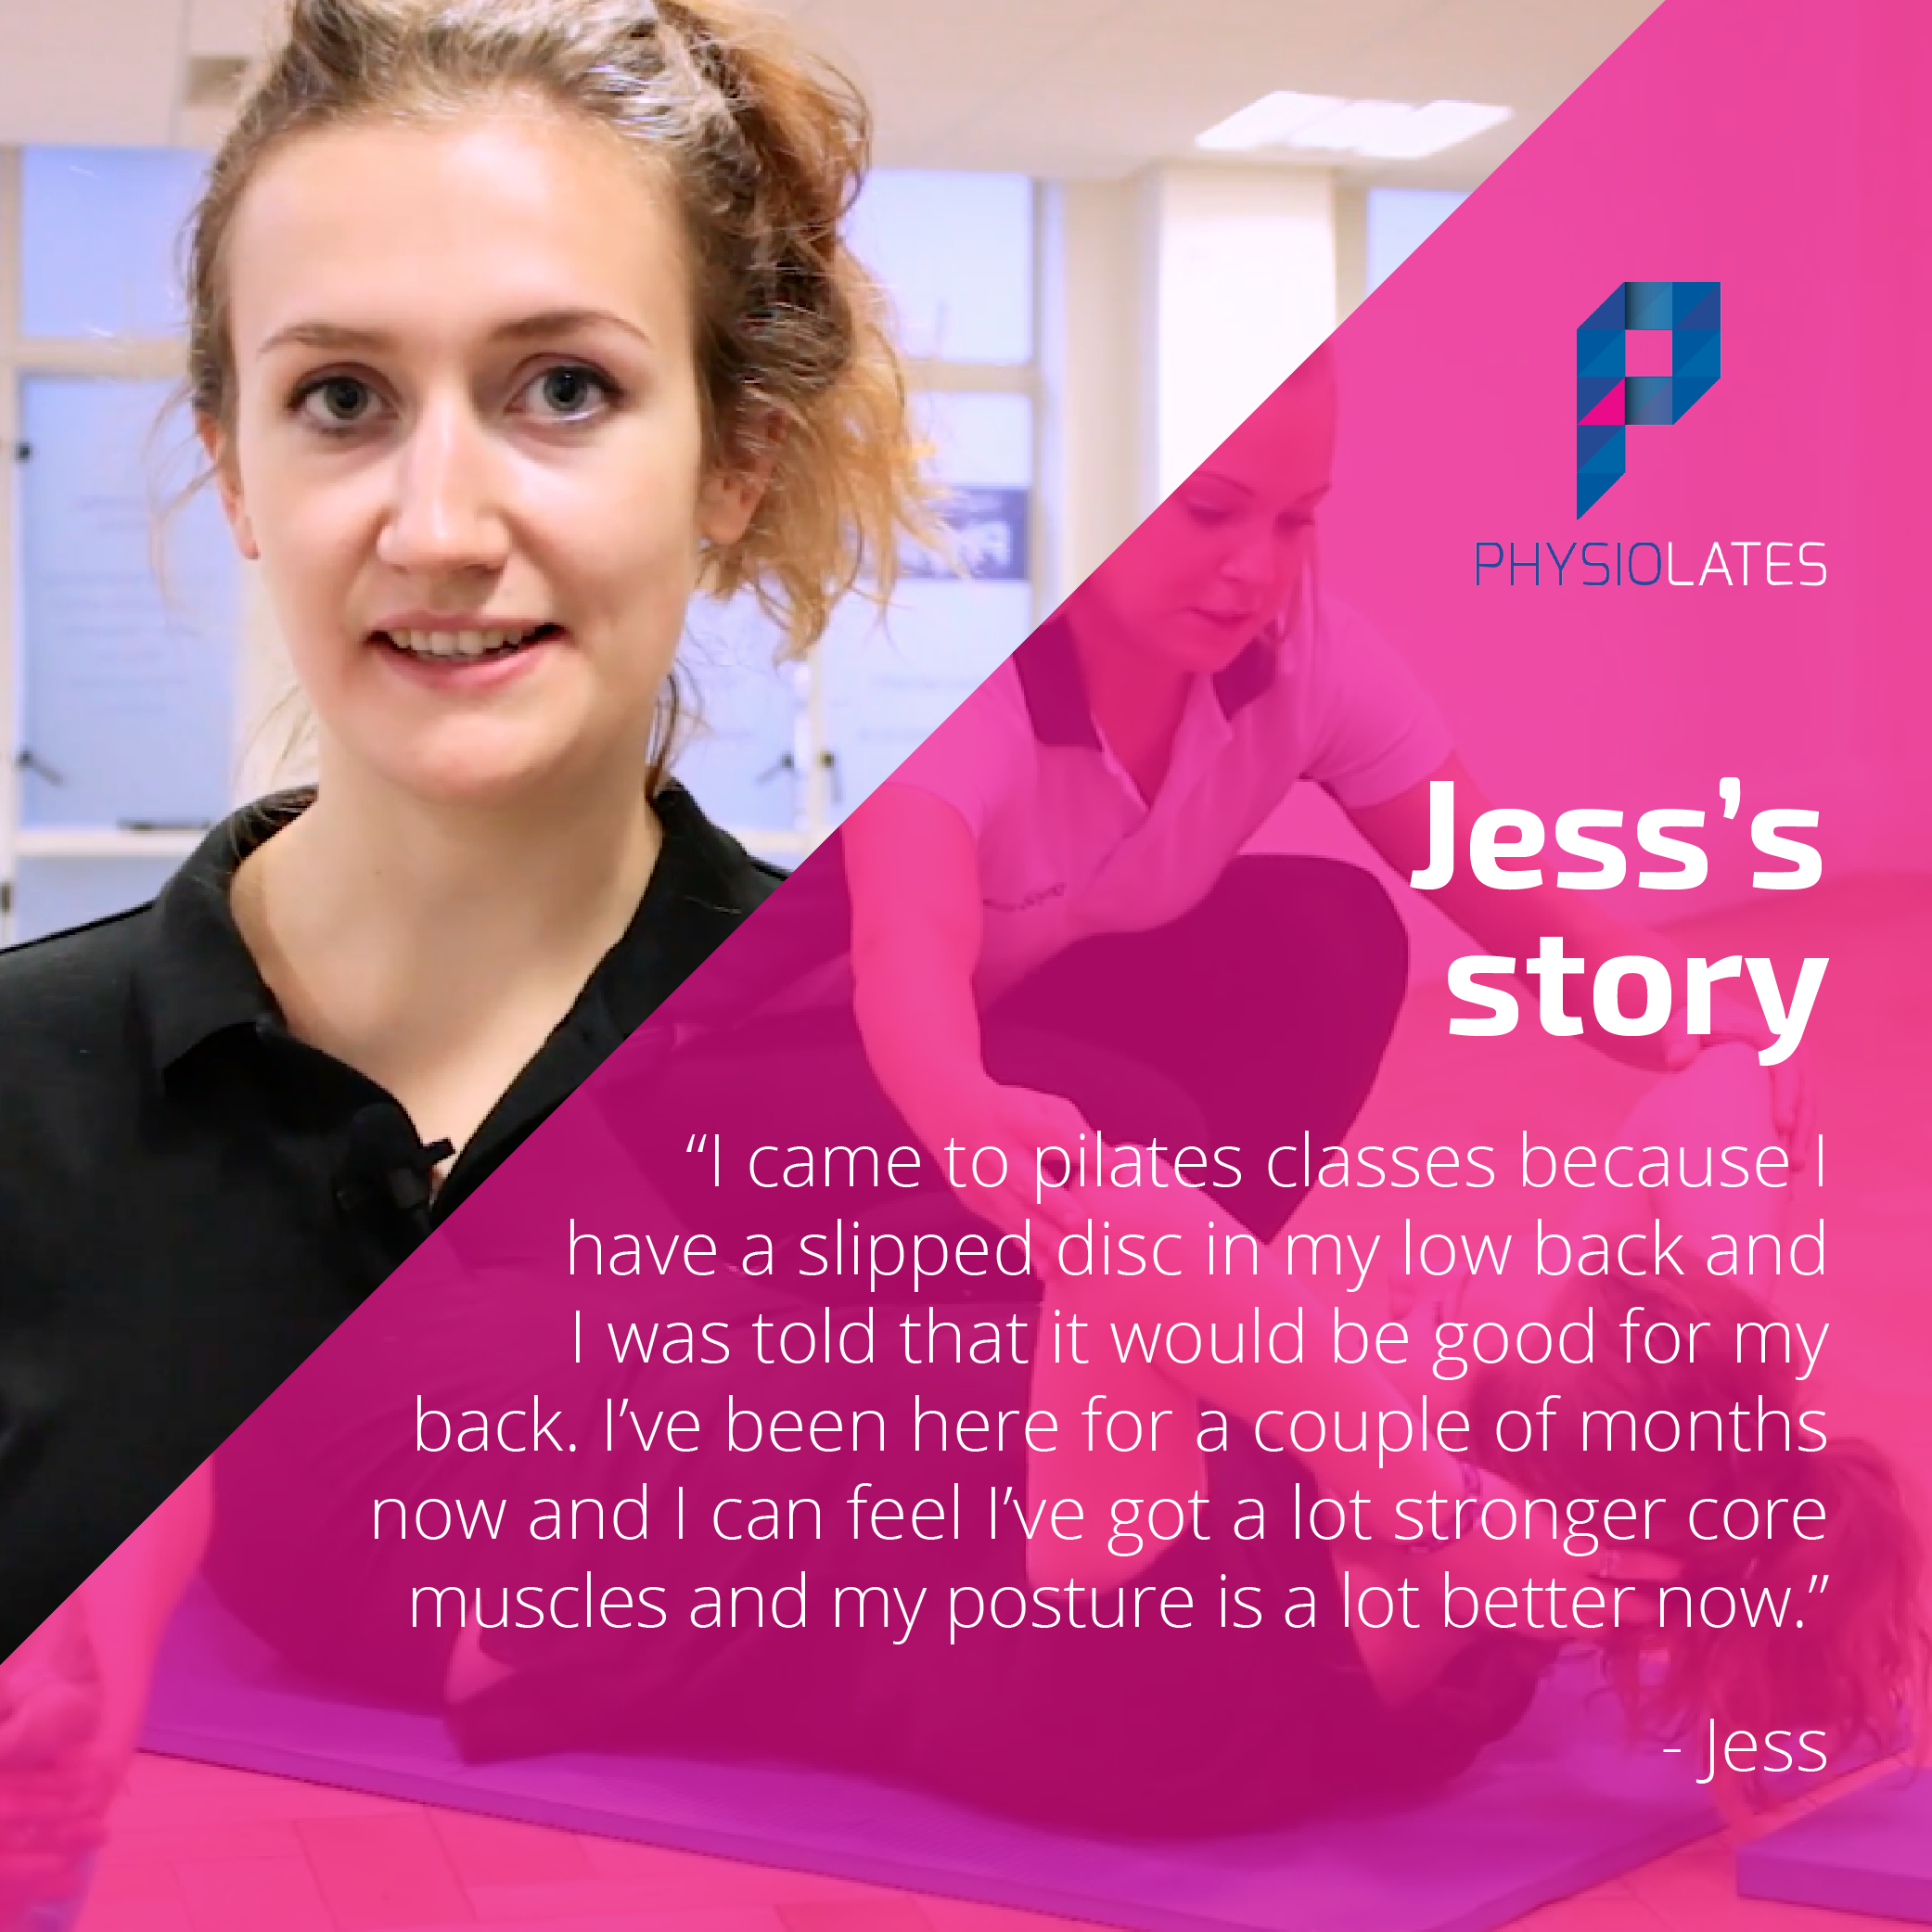 Jess's Story, I came to pialtes classes because I have a slipped disk in my low back and i was told that it would be good for my back.